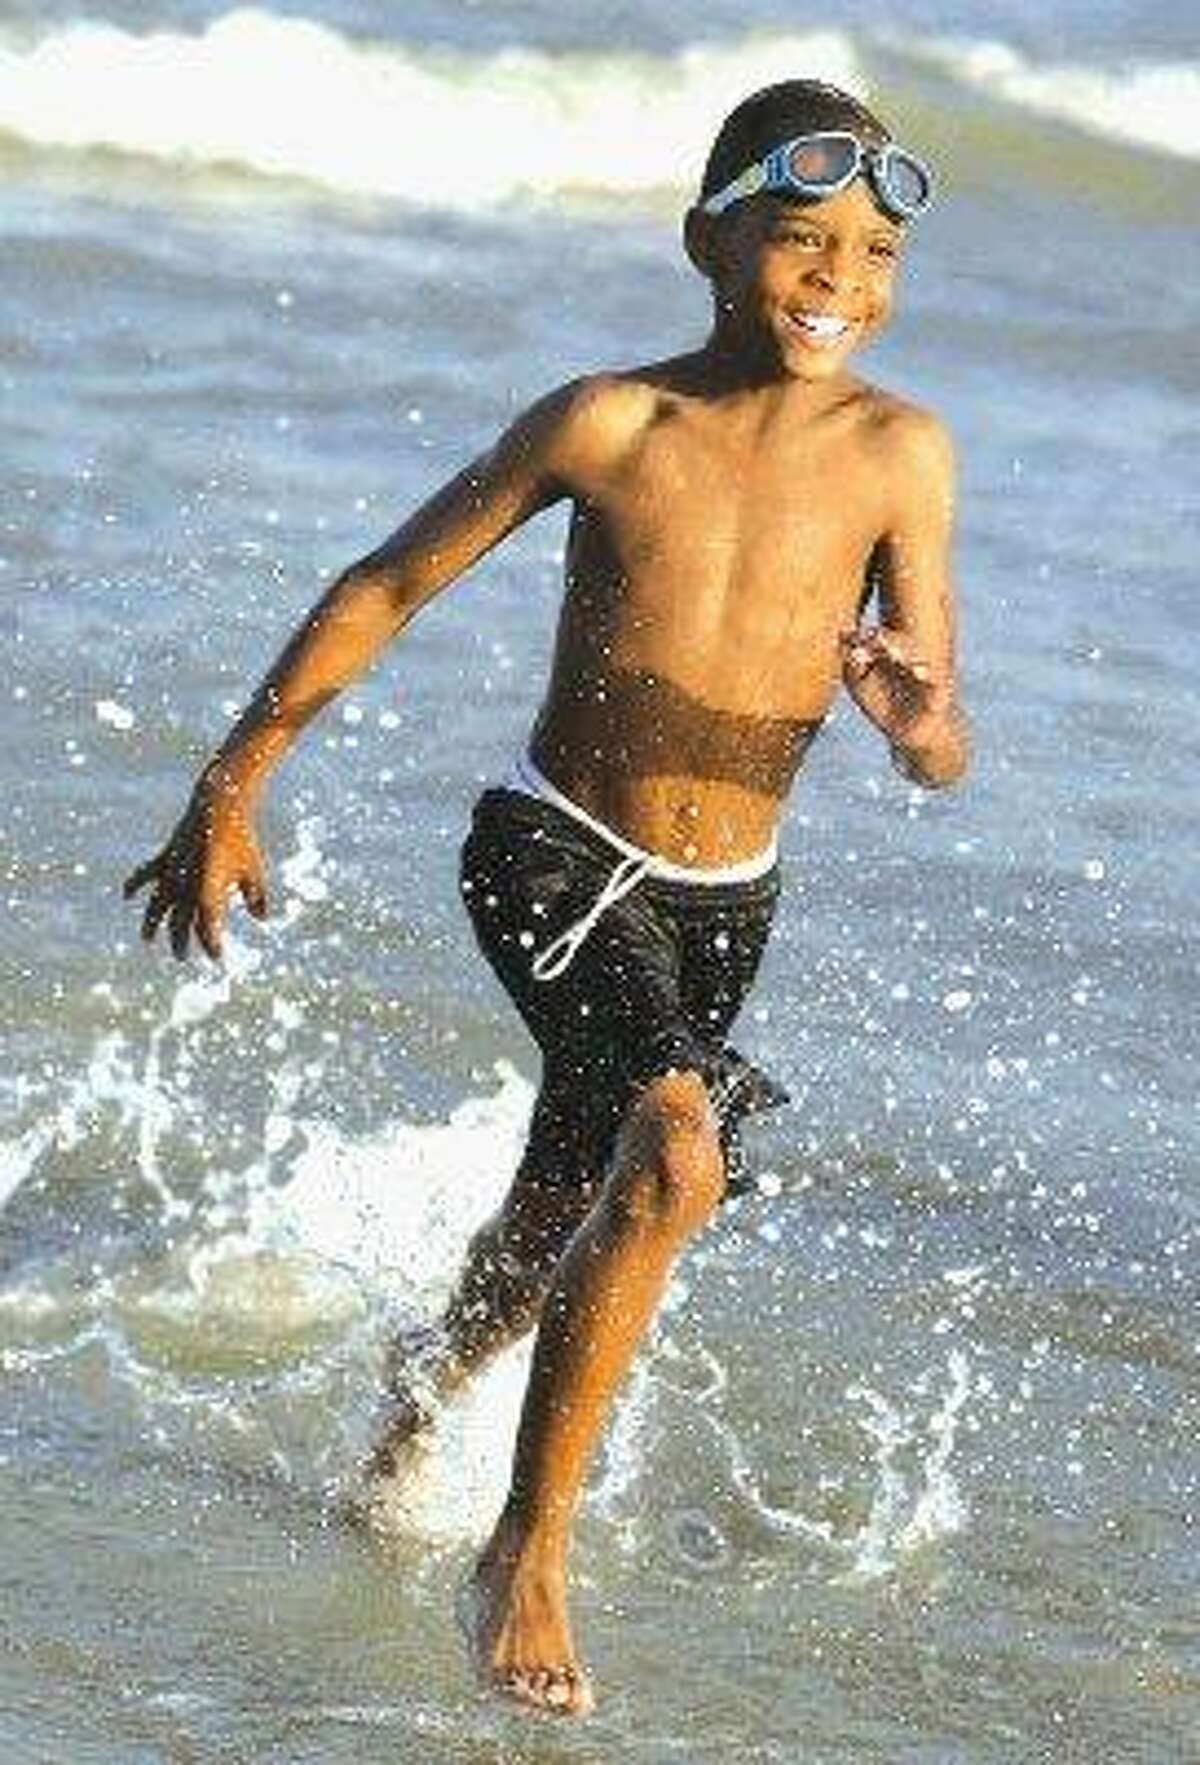 Beaumont resident Marcus Mitchell has some fun in the waves during a trip to Galveston Island with his family.